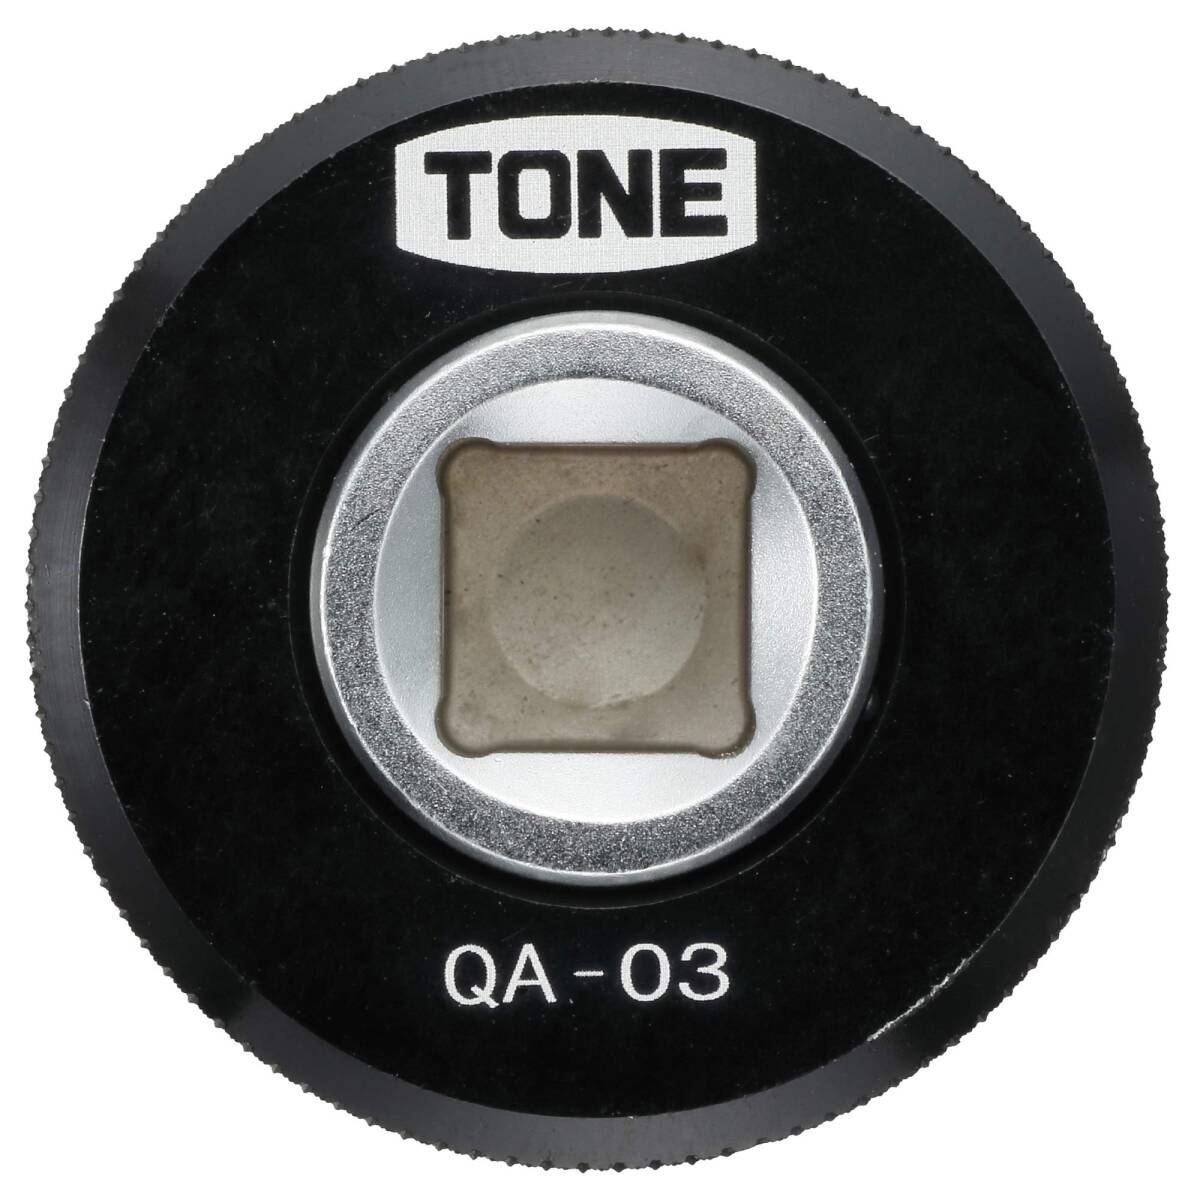  tone (TONE) Quick adaptor HPQA-03 difference included angle 9.5mm(3/8) black 